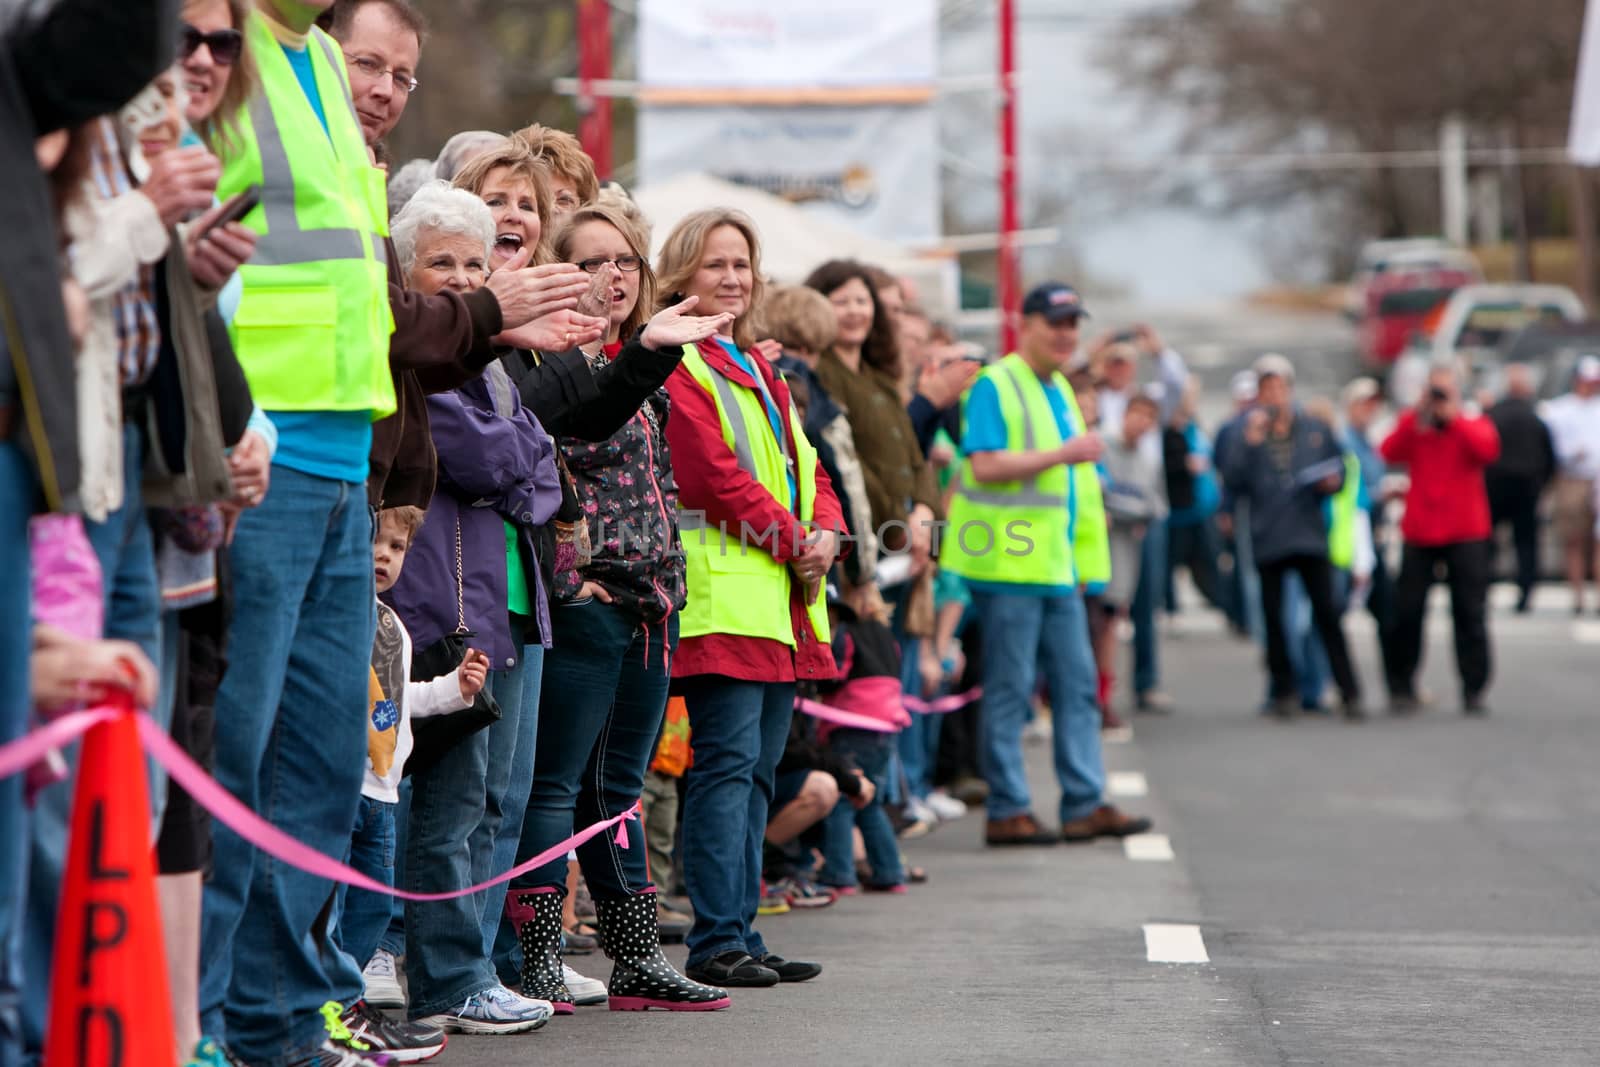 Spectators Cheer Oncoming Participants In Small Town Race by BluIz60